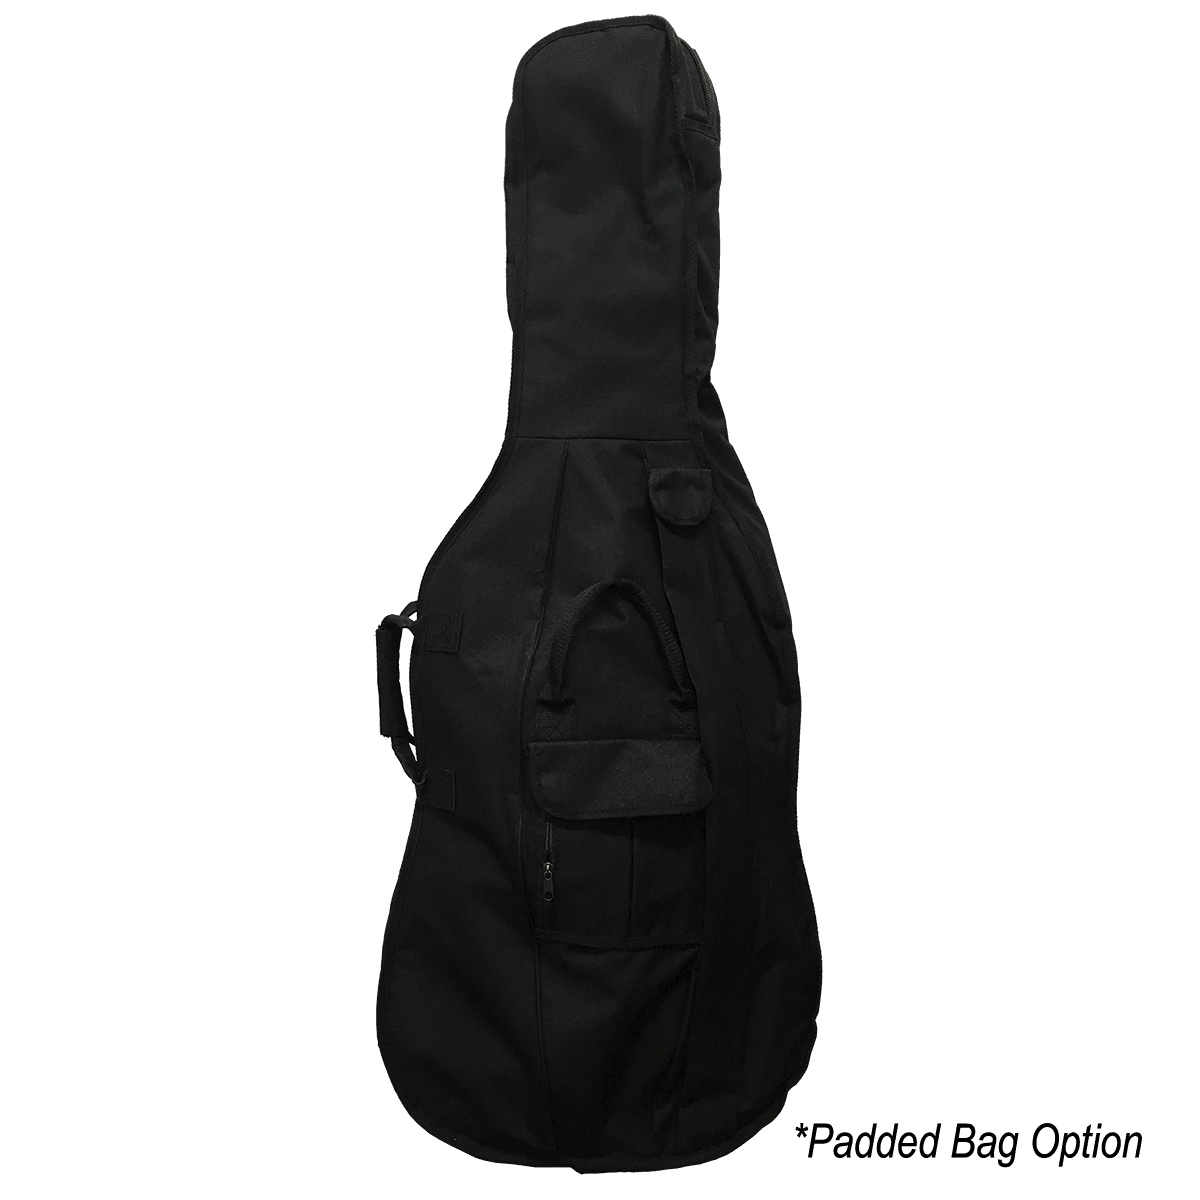 Vivo Student 4/4 Cello Outfit with Case